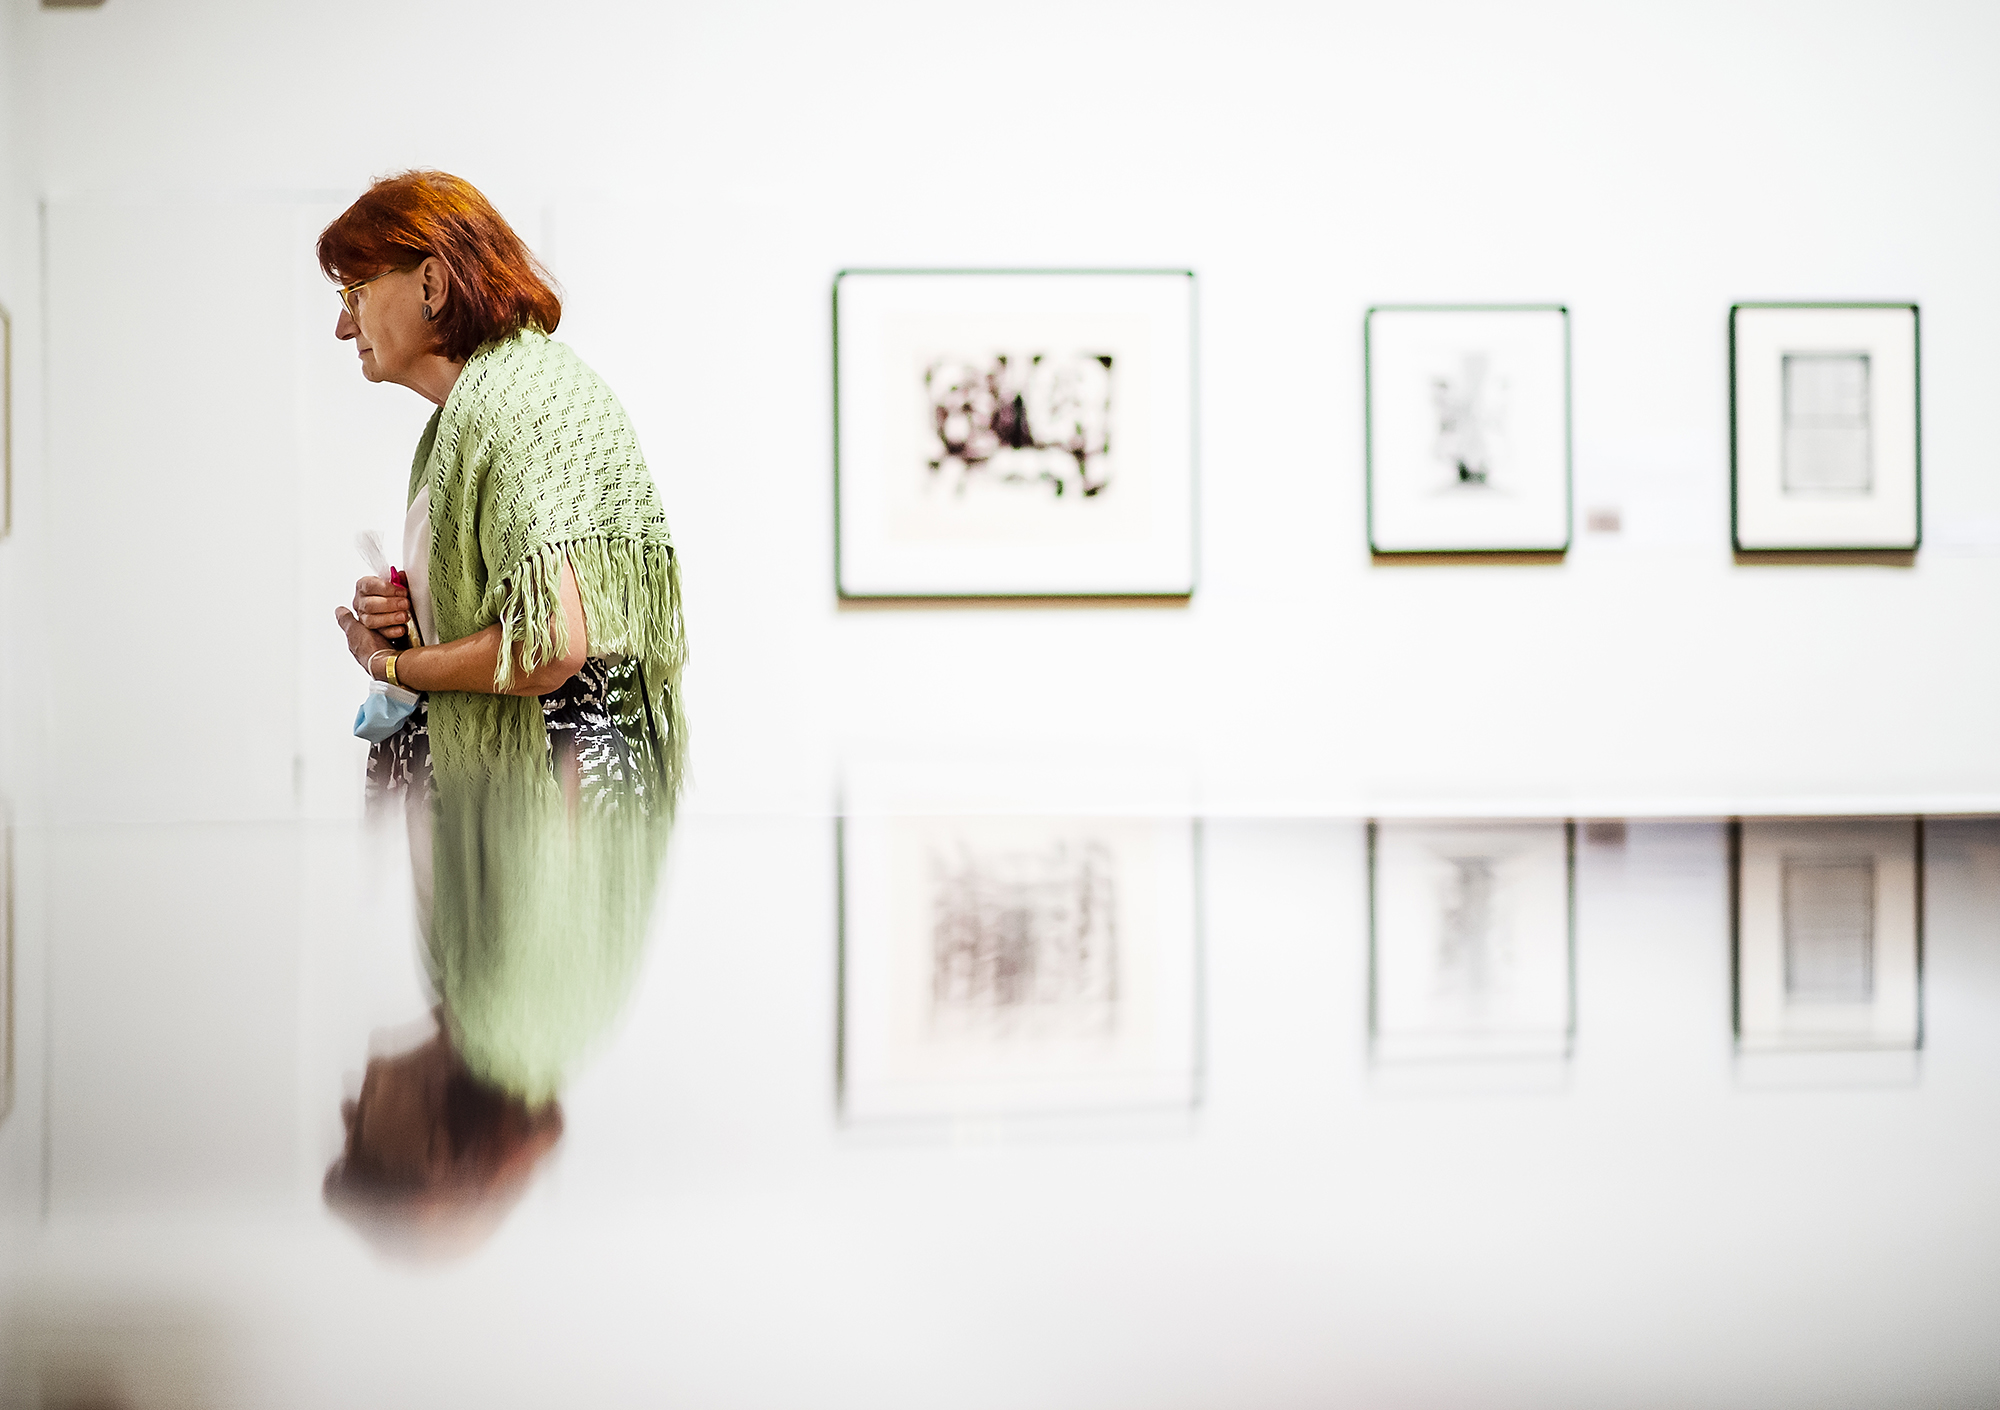 A person walks past three artworks hanging on the wall at the Arthur Ross Gallery.